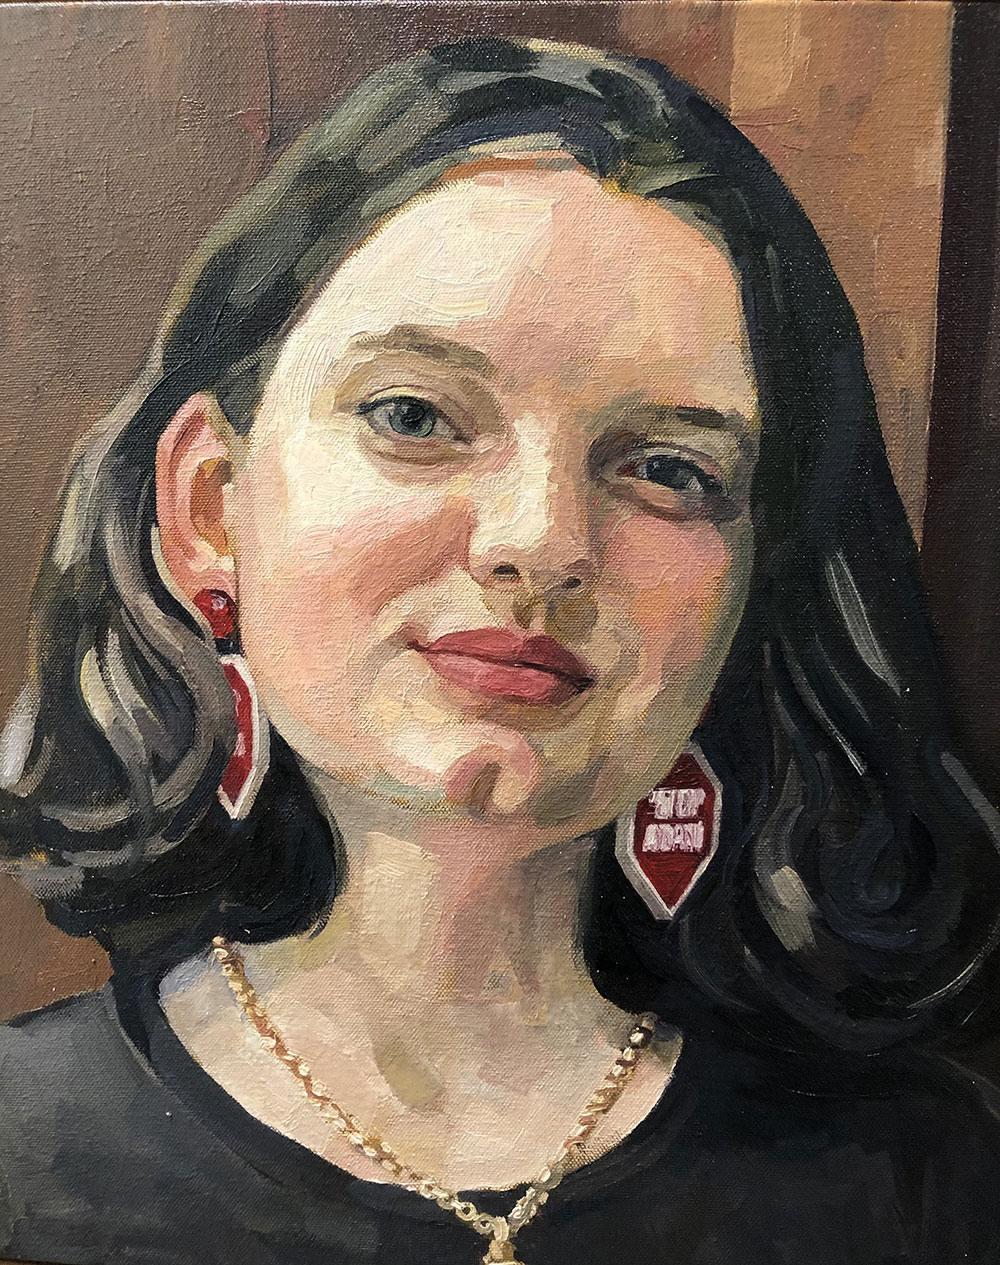 GIRL WITH A RED EARRING